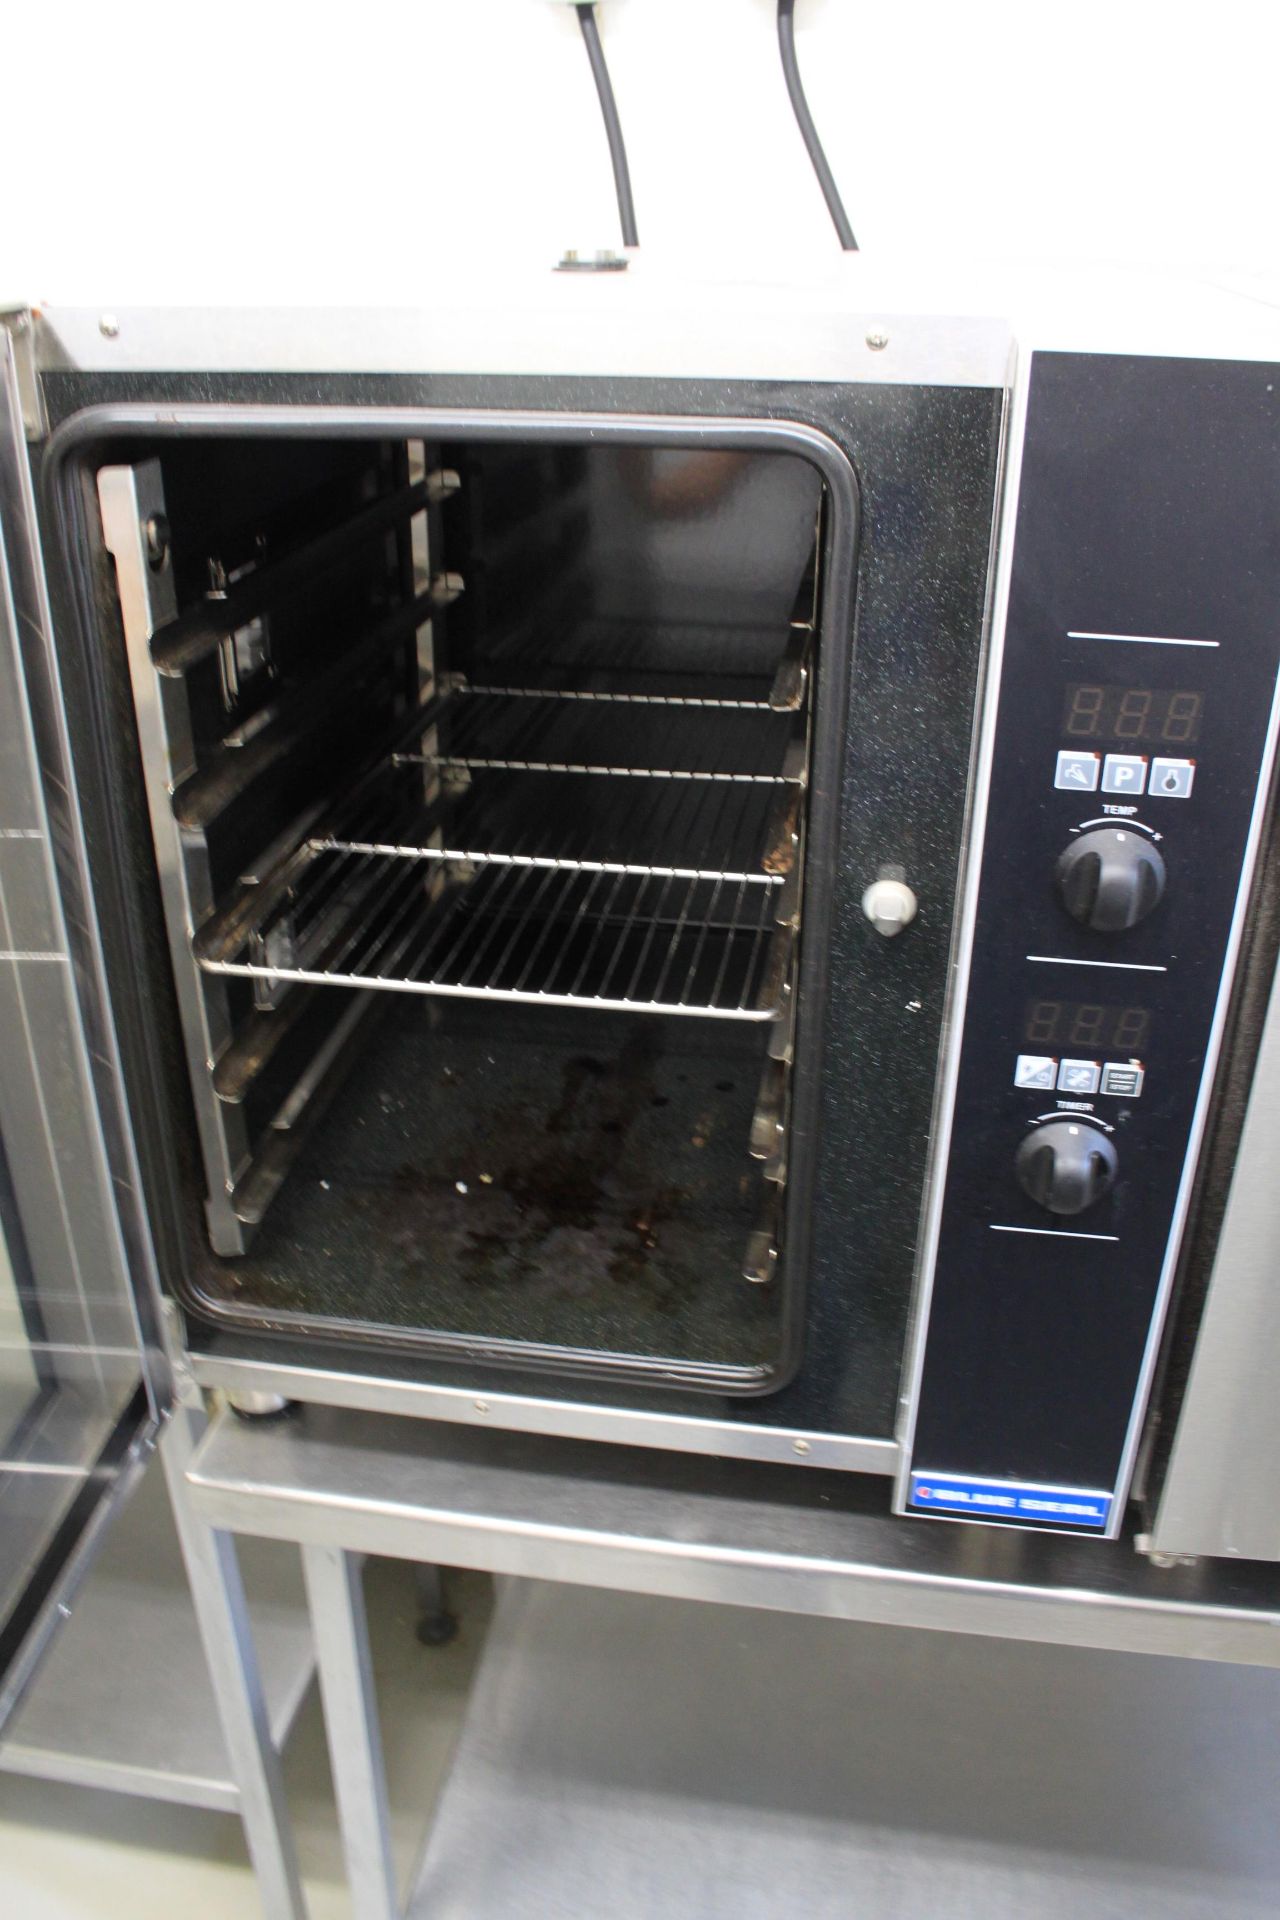 Blue Seal Turbofan Convection Oven E33D5 6kw. 20 Programmes And Three-Stage Cooking With Simple Dial - Image 2 of 7